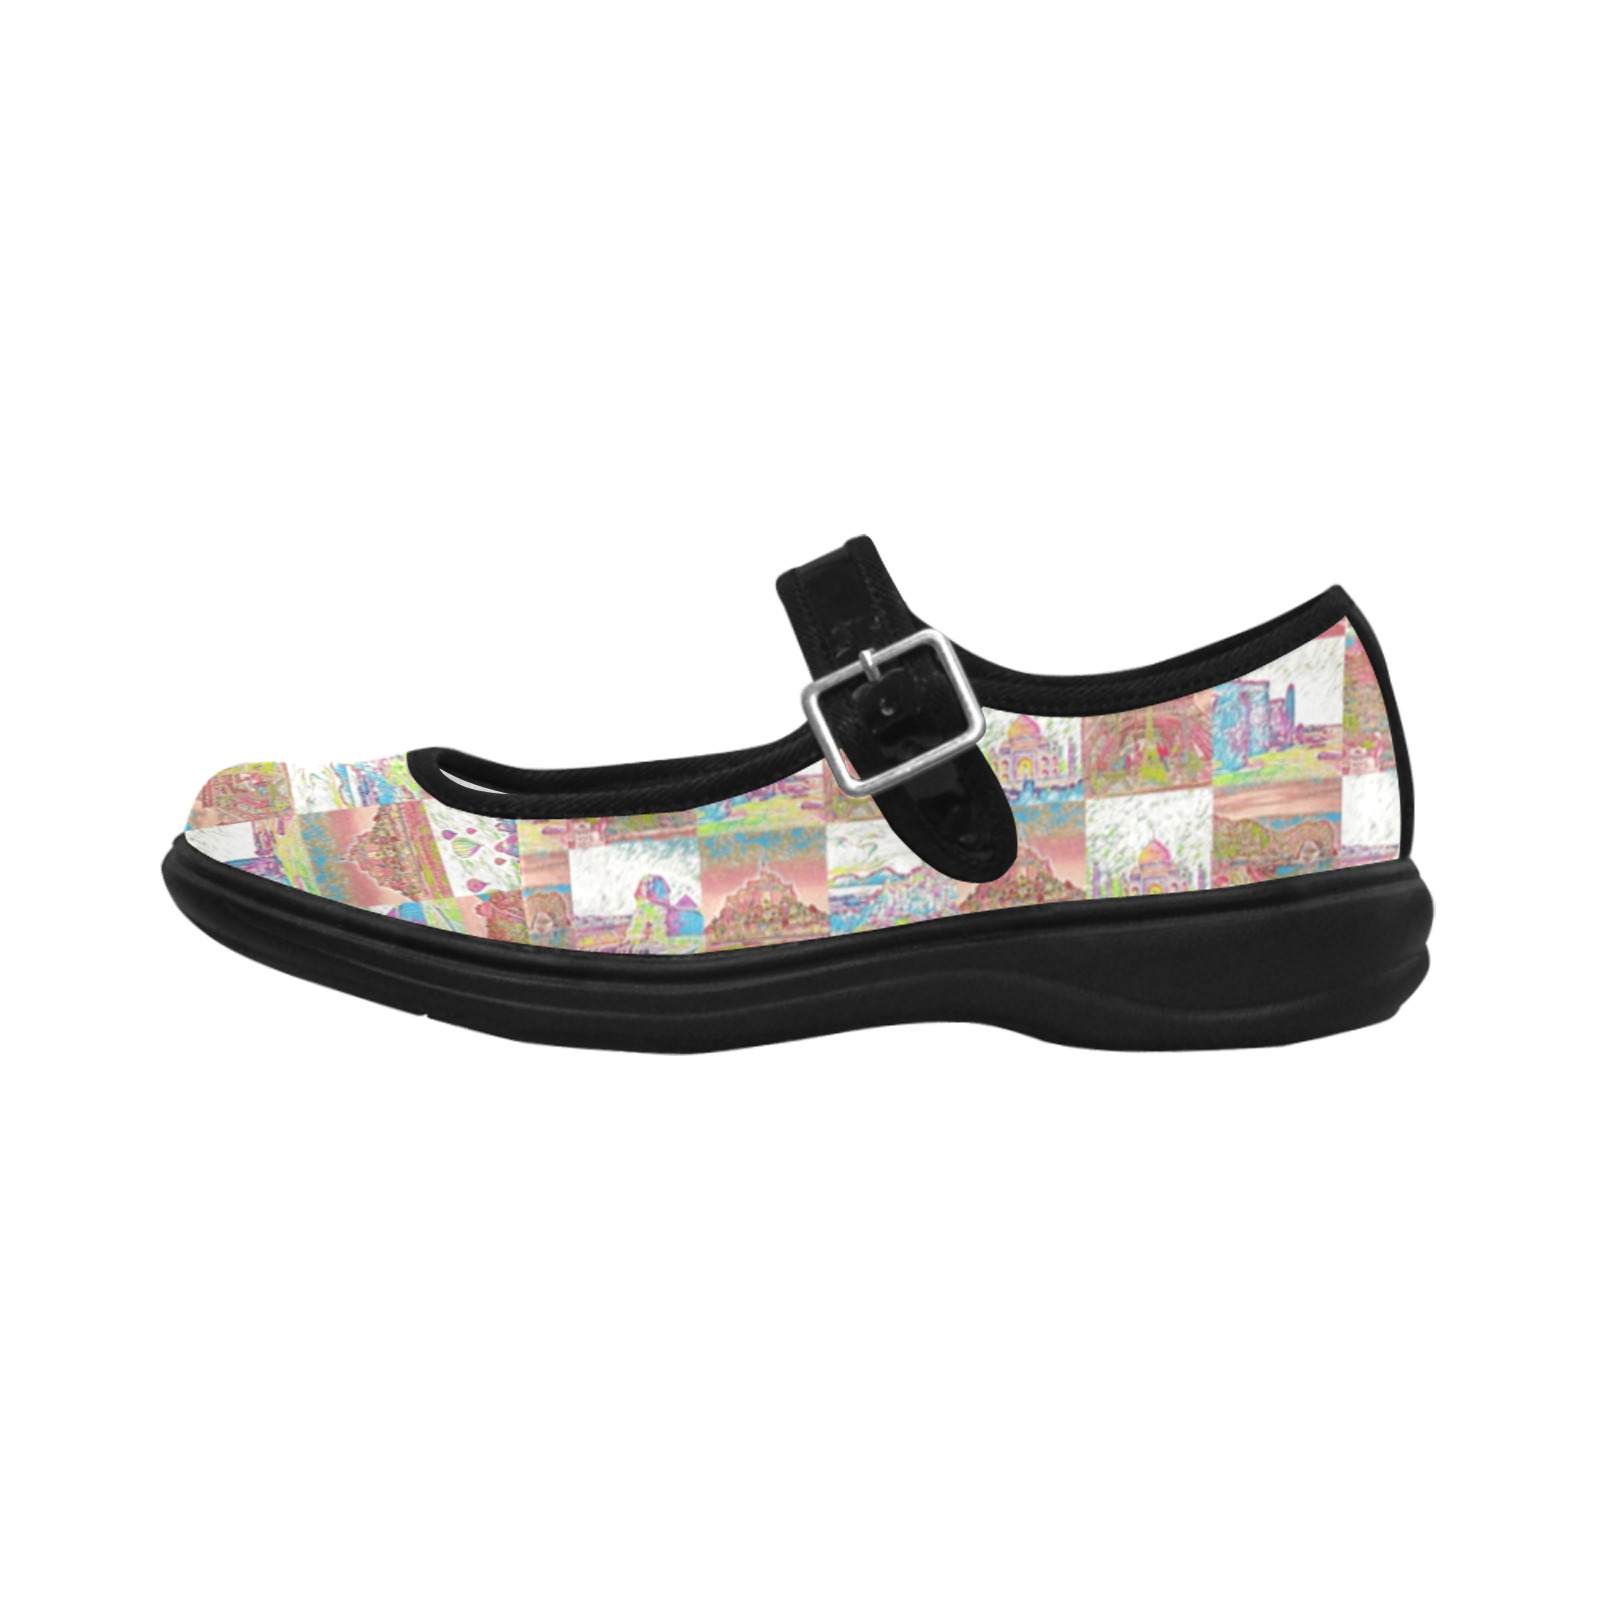 Big Pink and White World travel Collage Pattern Mila Satin Women's Mary Jane Shoes (Model 4808)